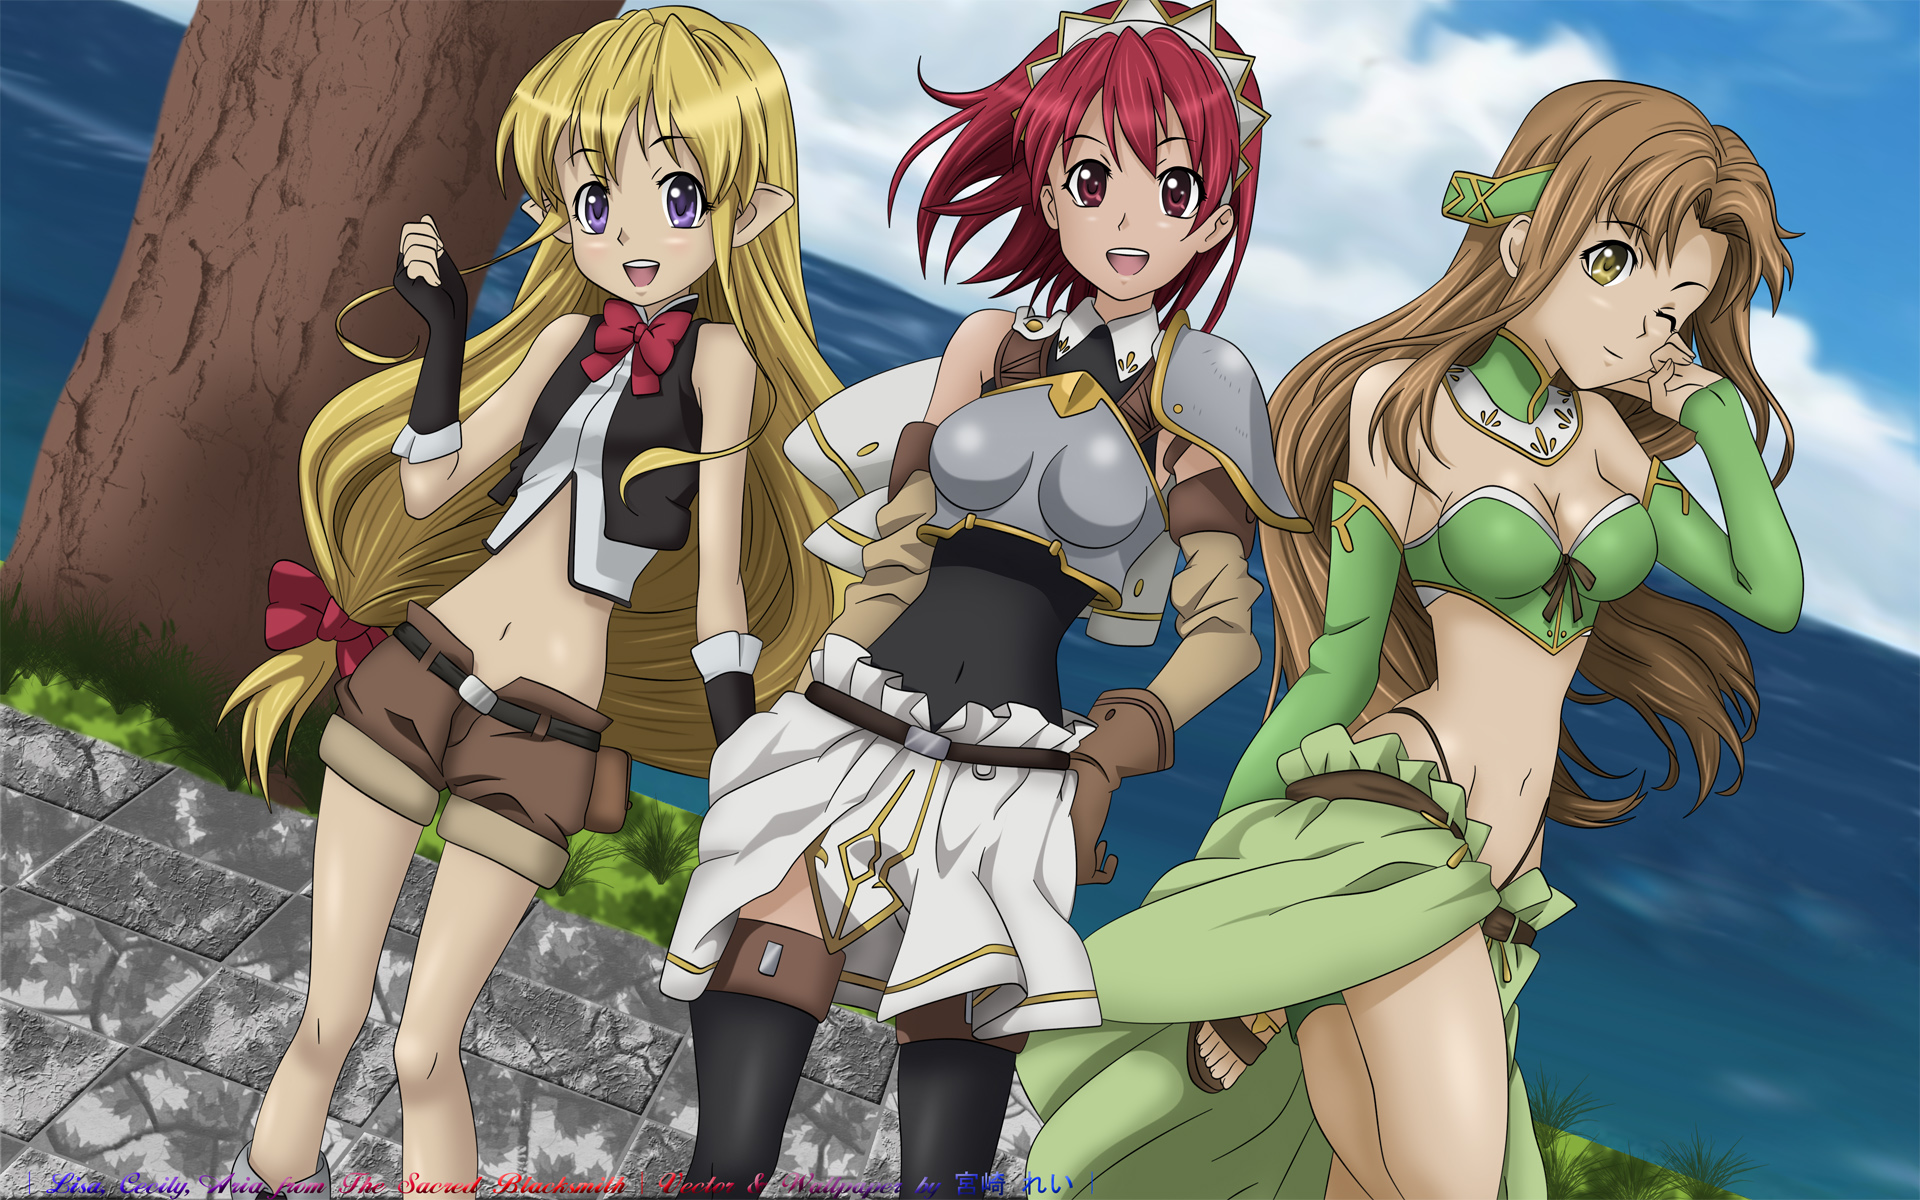 Anime wallpaper featuring a scene from The Sacred Blacksmith series.